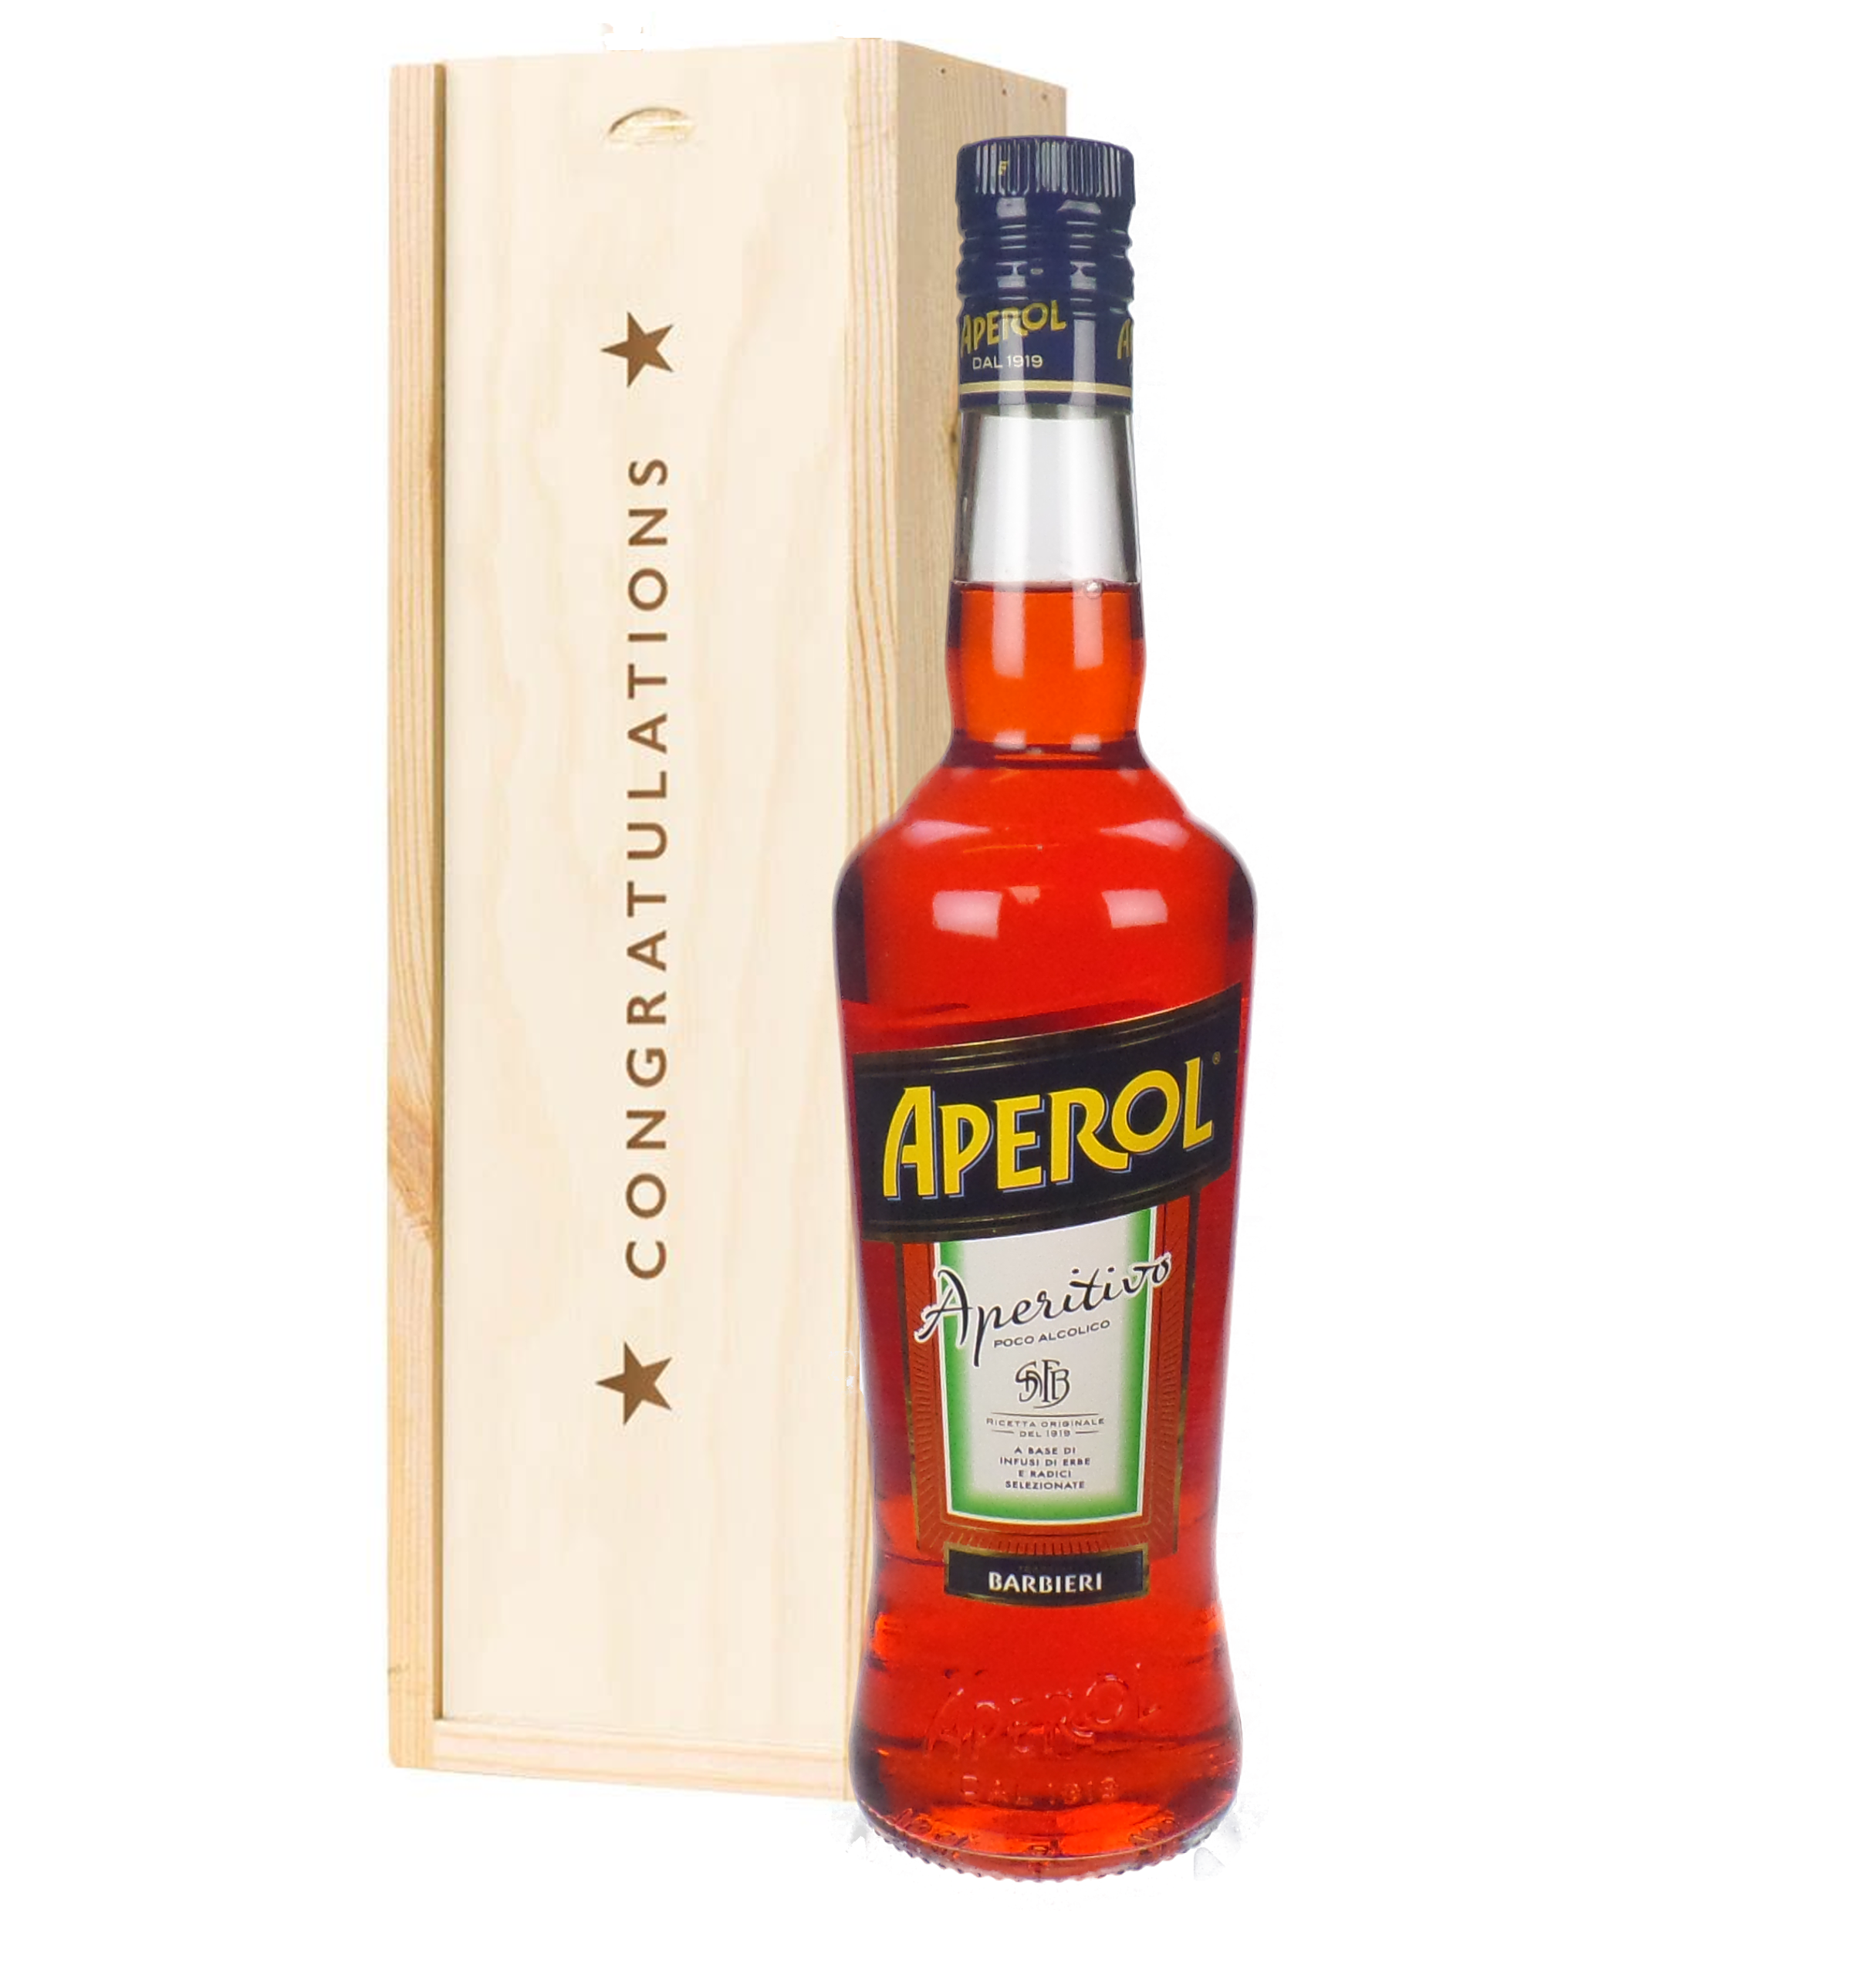 Aperol Spritz Congratulations Gift - Next Day Delivery UK